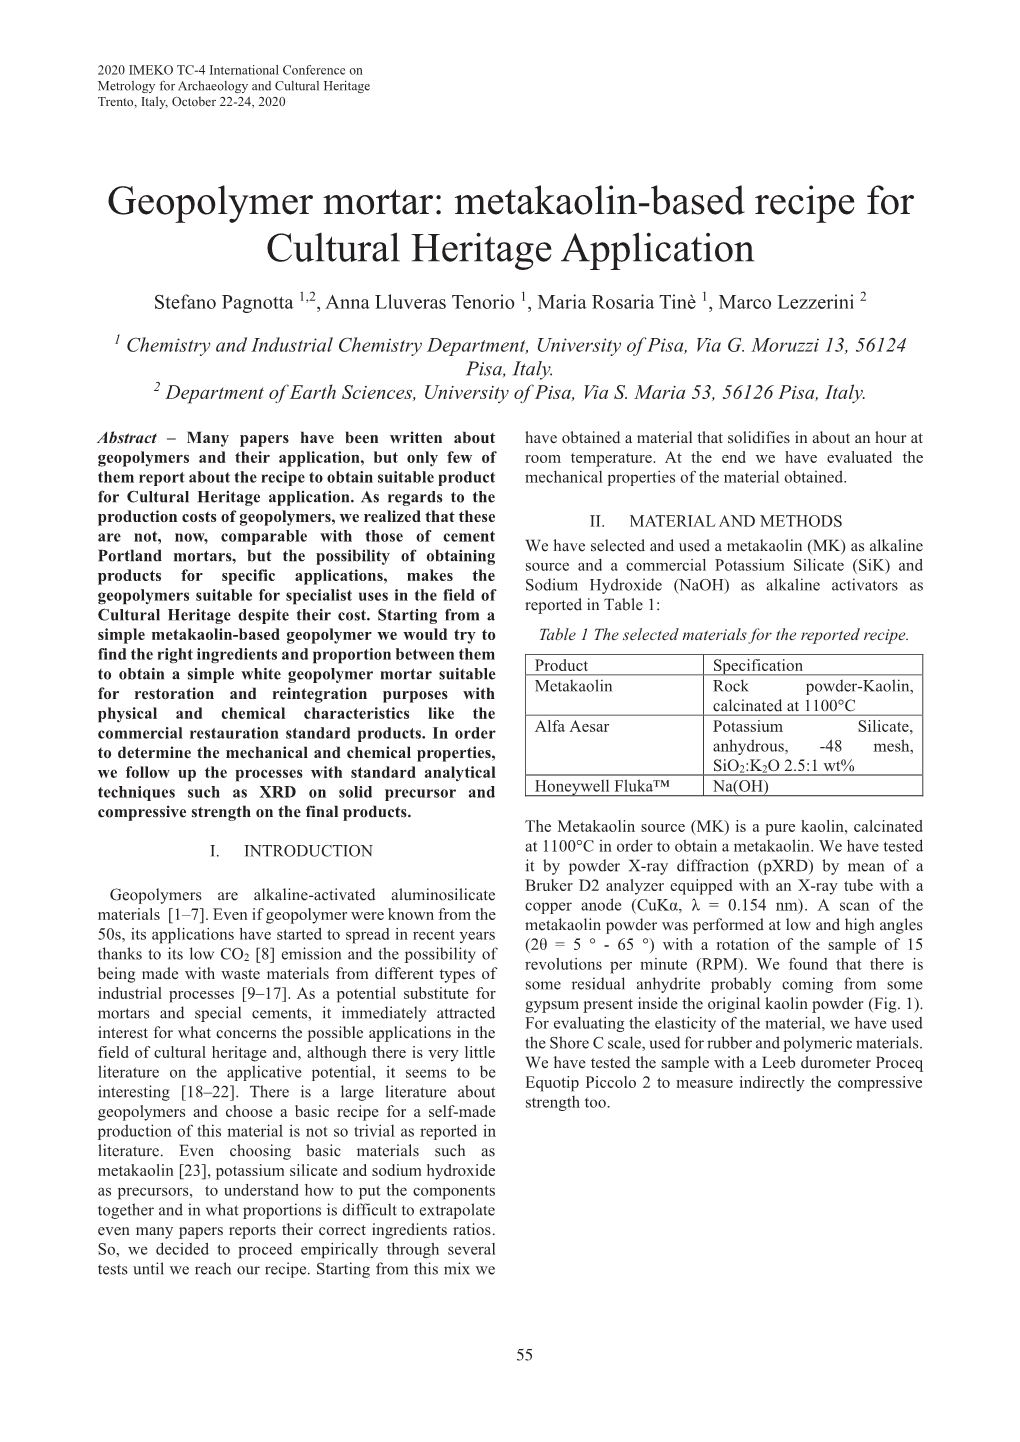 Metakaolin-Based Recipe for Cultural Heritage Application